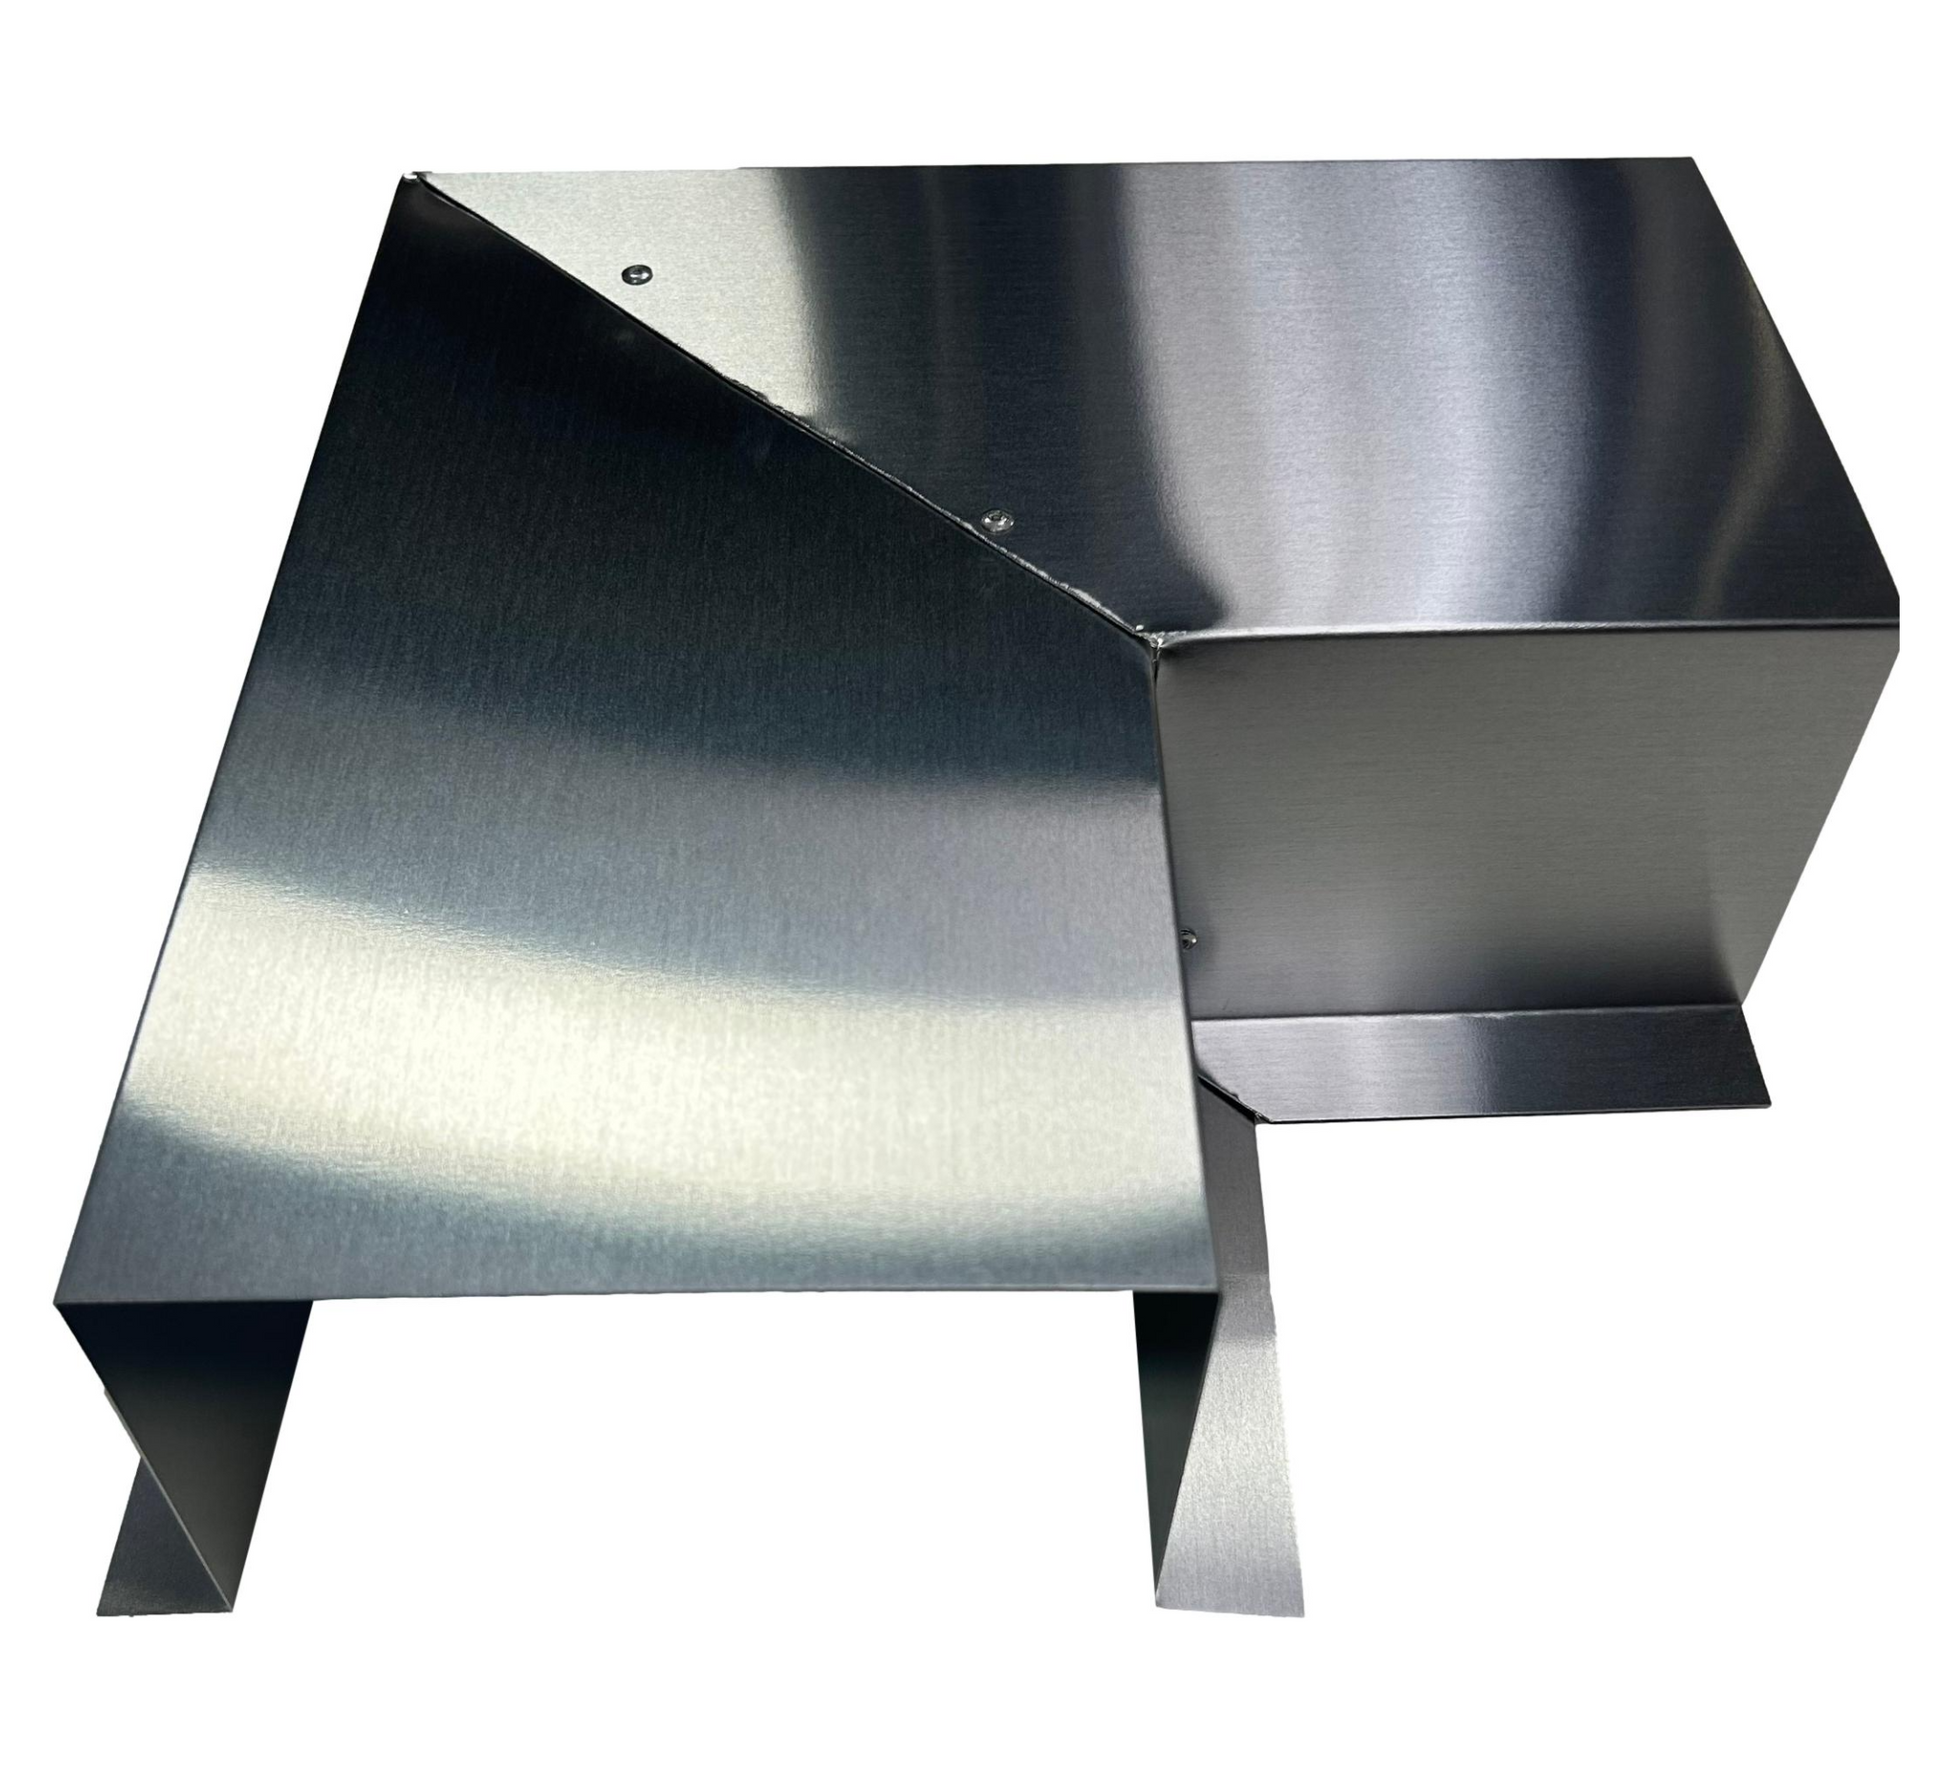 A shiny metallic bracket with an angular design. The structure includes flat surfaces and right angles, creating a modern and industrial look. The metal has a brushed texture, displaying a clean and polished finish, ensuring easy installation for HVAC line sets or Perma Cover Residential Series - Line Set Cover Side Turning Elbows - Premium Quality.